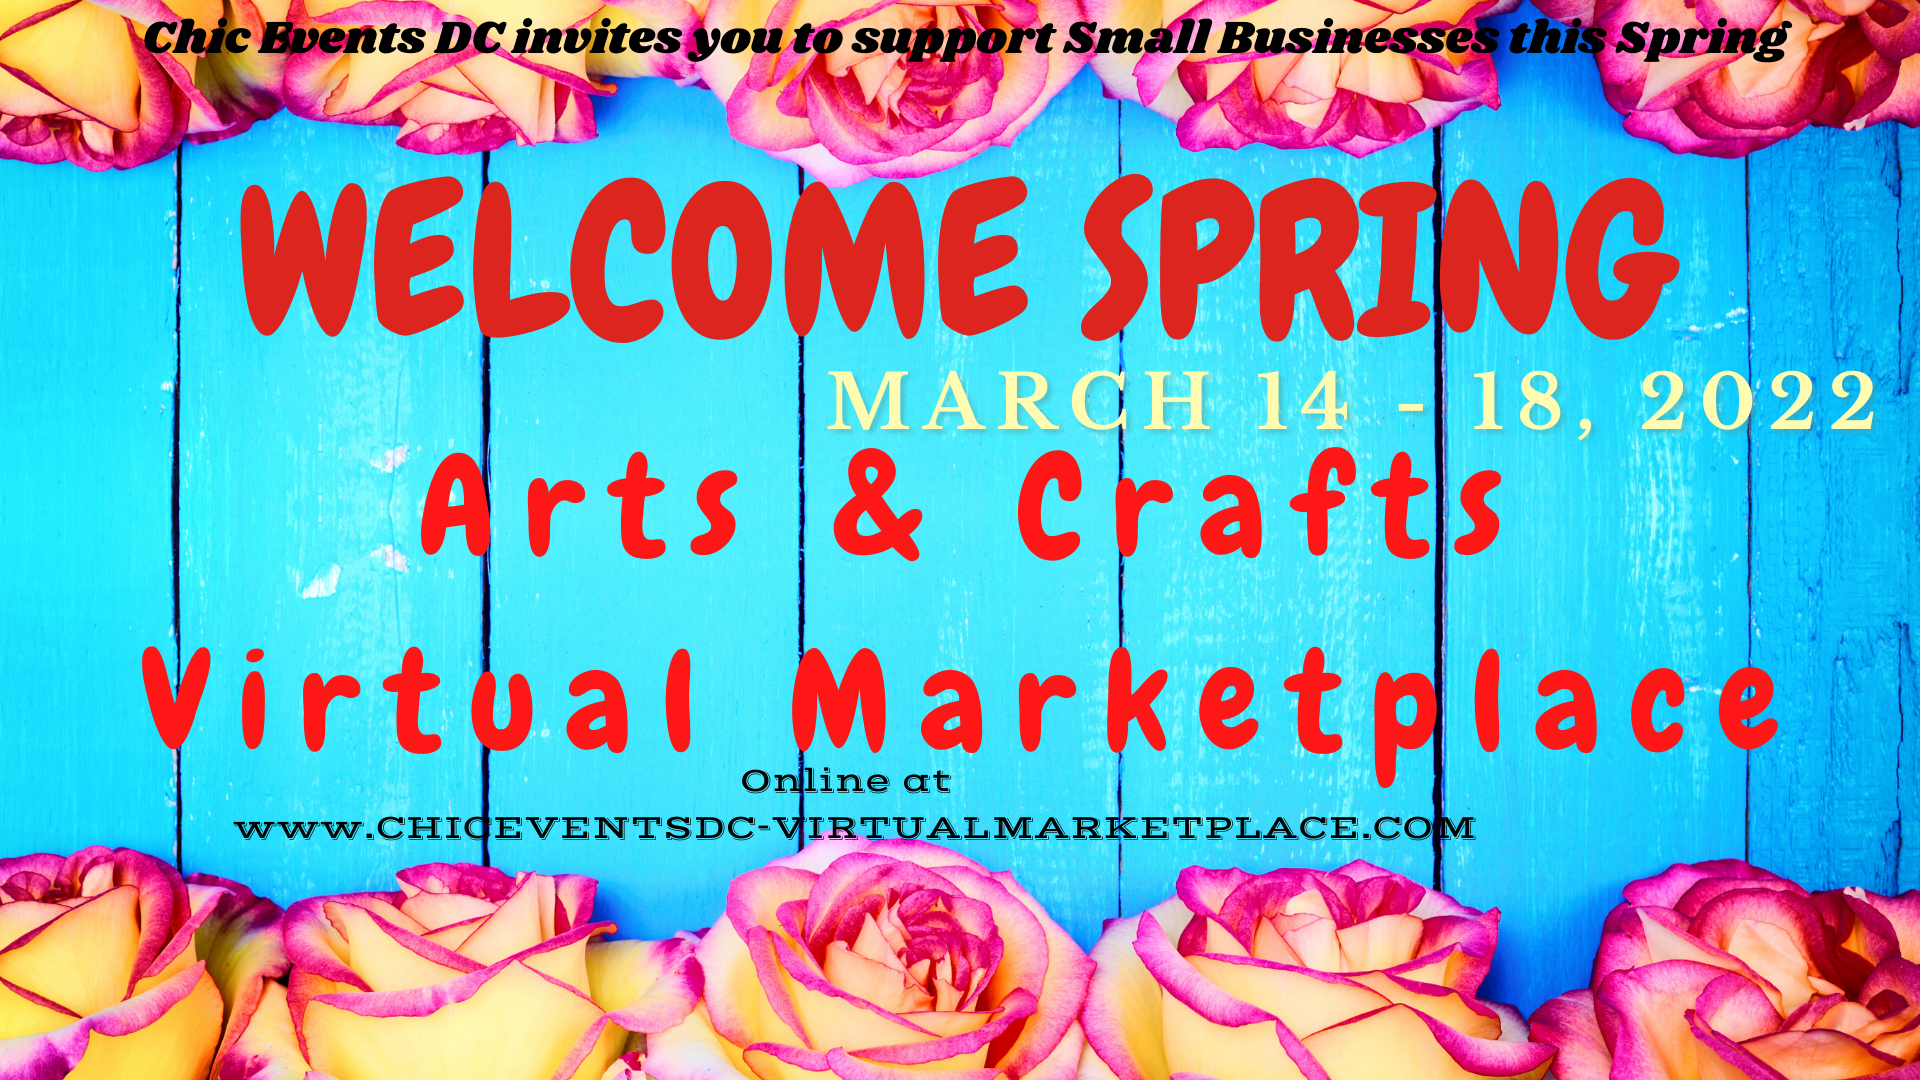 Welcome Spring Arts & Crafts Virtual Marketplace